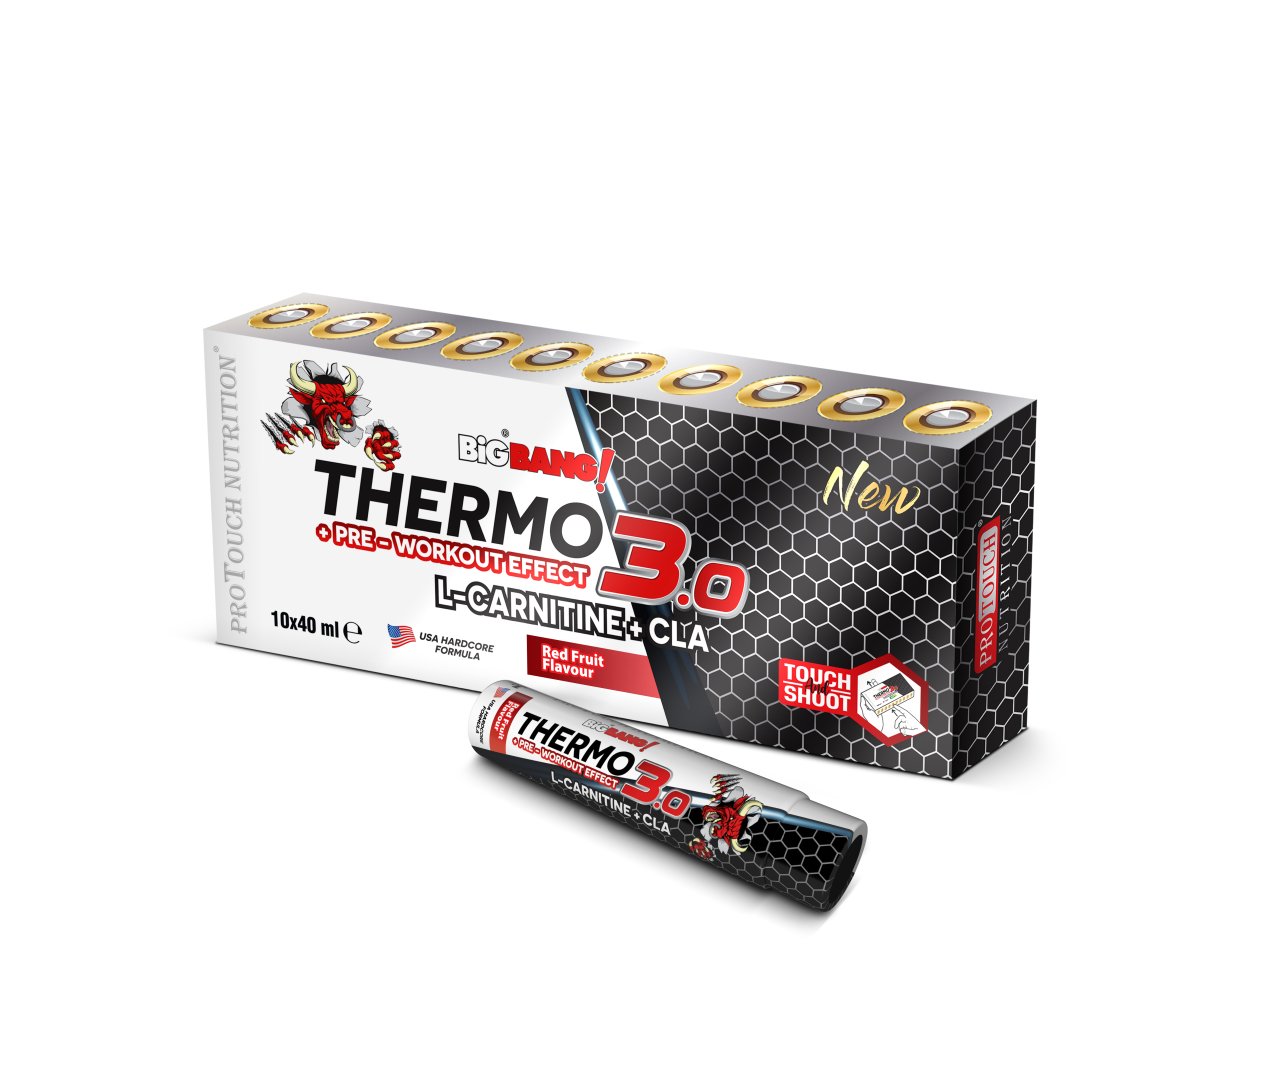 Protouch Nutrition Thermo 3.0 L-carnitine + Cla 10 Ampul